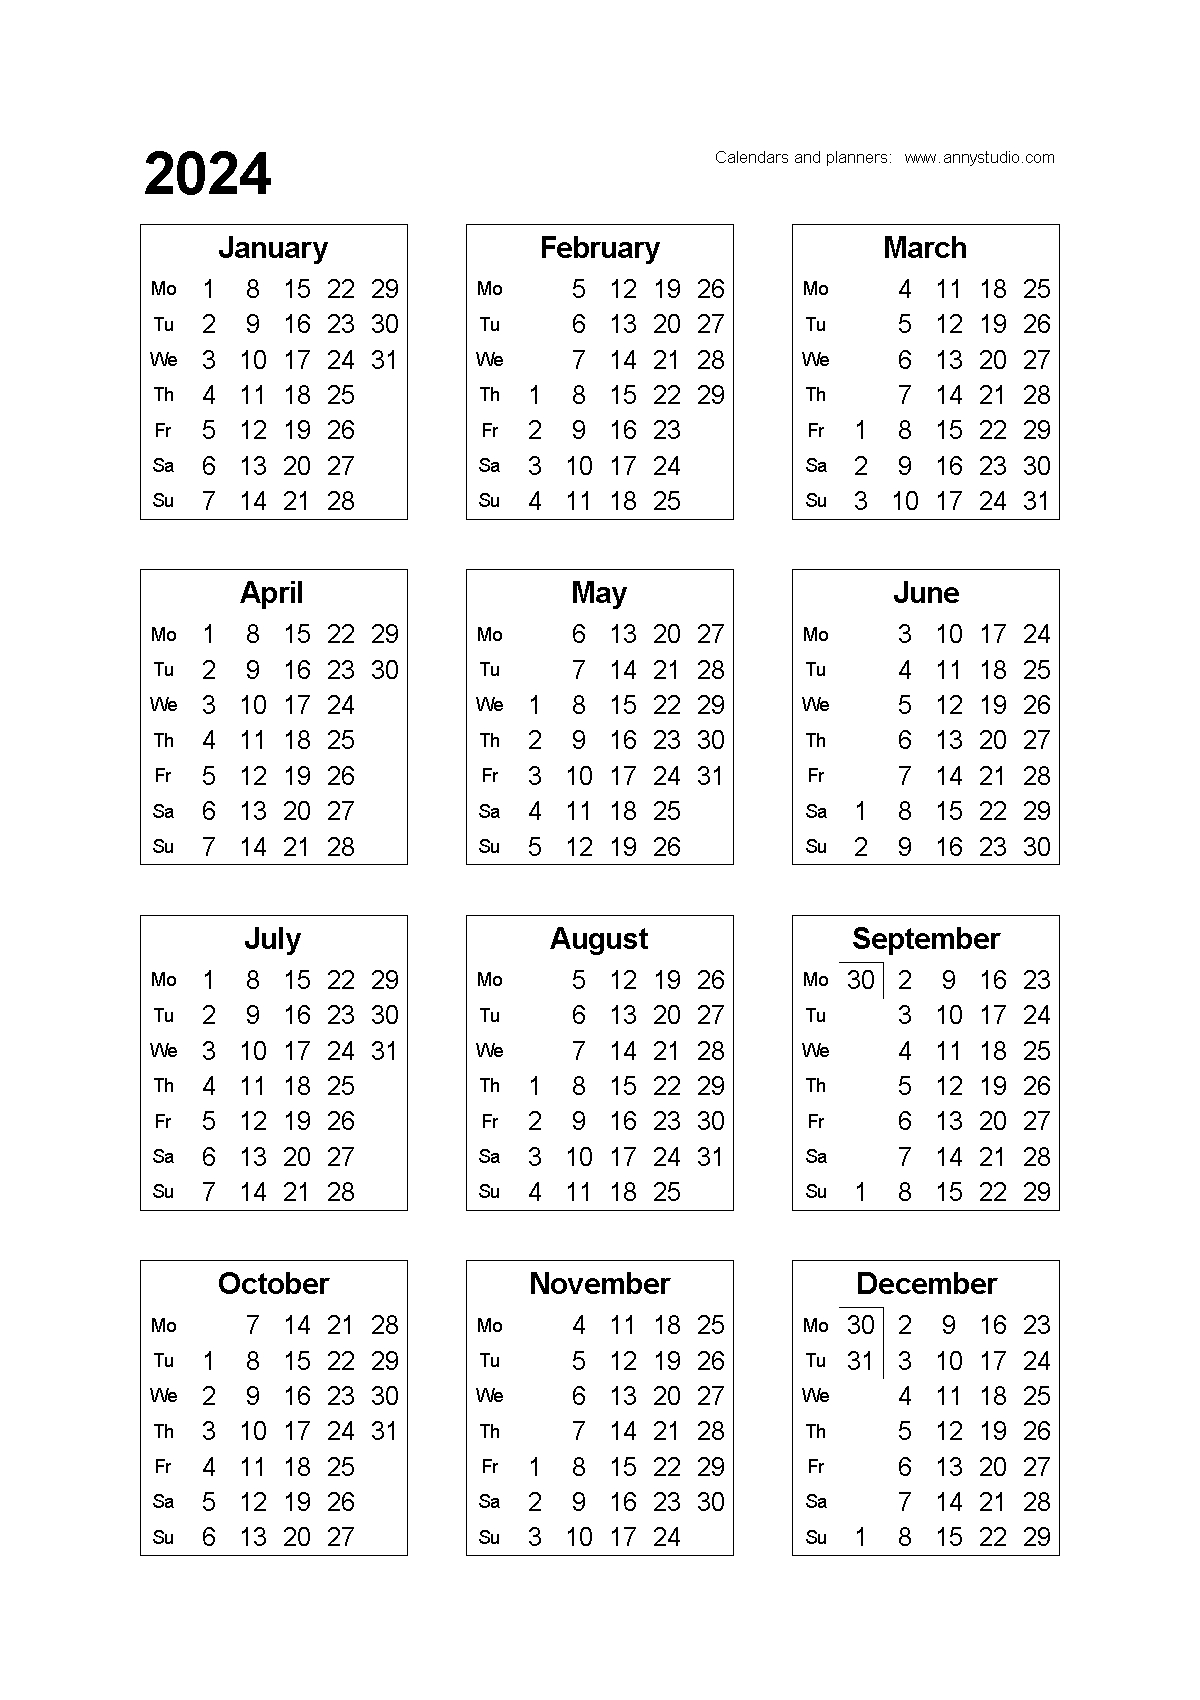 Free Printable Calendars And Planners 2024, 2025 And 2026 | 2024 Victorian Calendar Printable